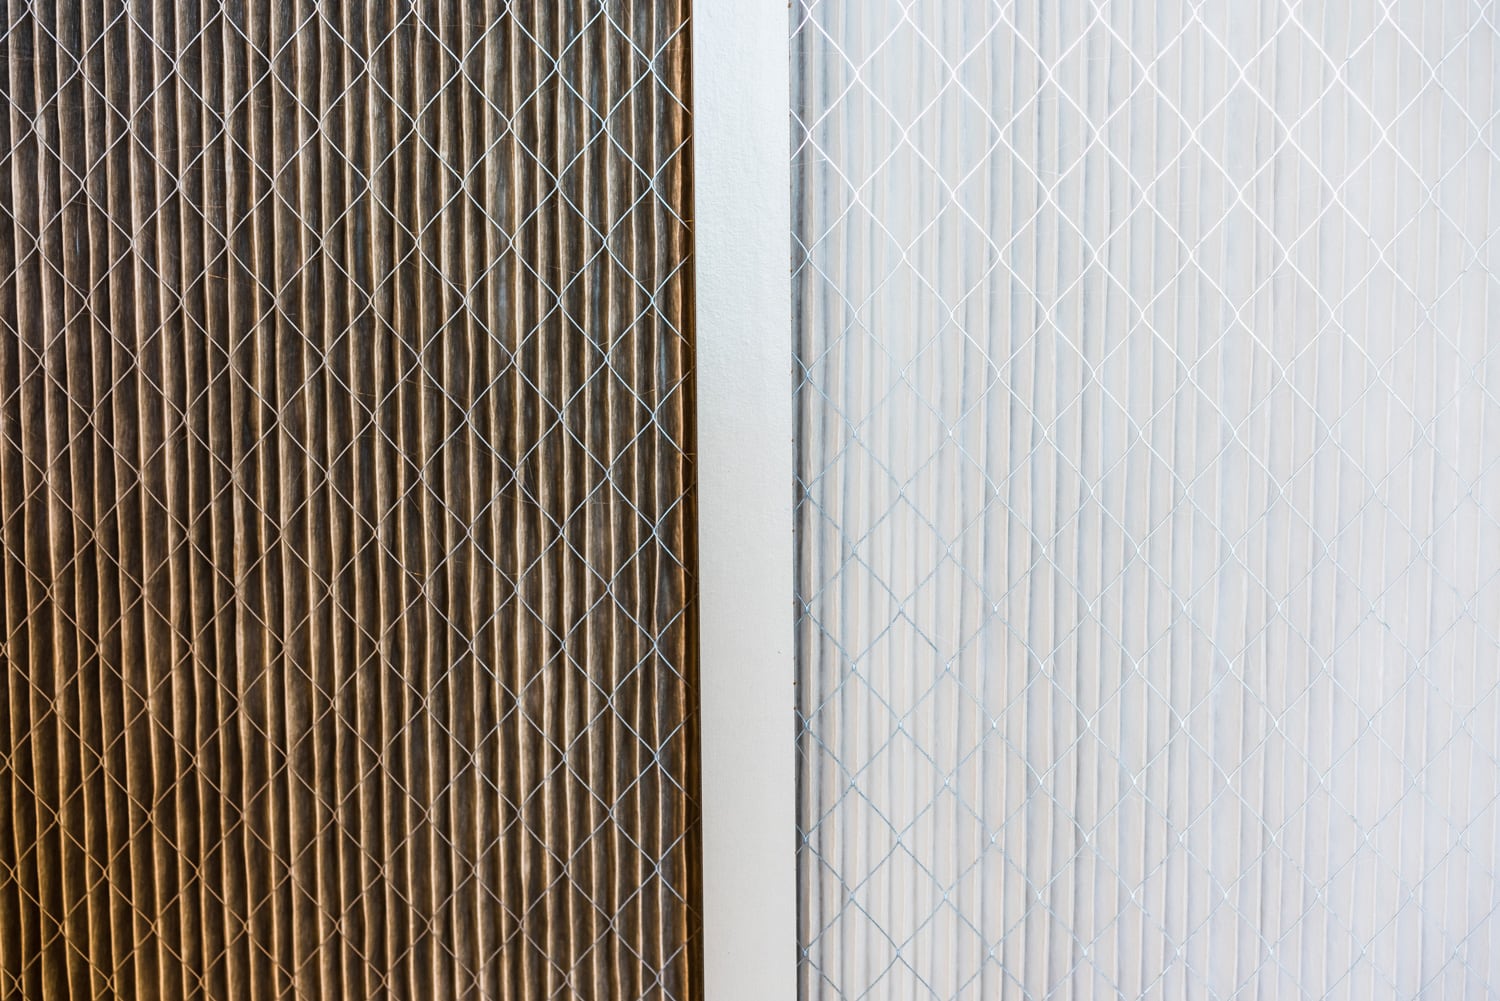 Side by side comparison of a dirty home air filter next to a clean white one; Filter replacement will maintain a good indoor air quality